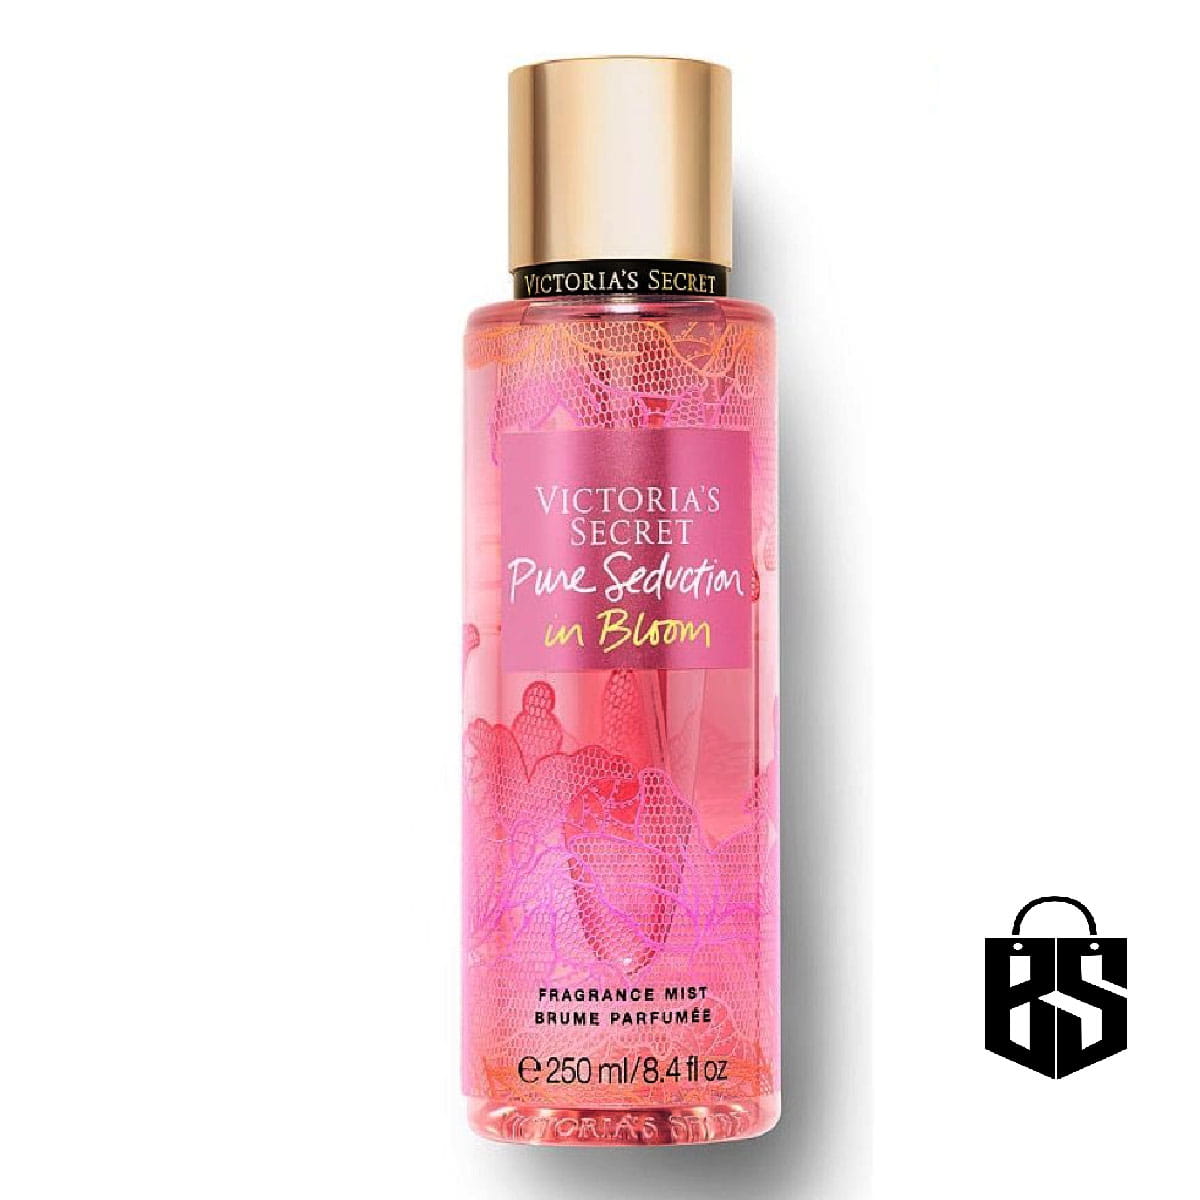 Victoria's Secret Fragrance Body Mist - Pure Seduction in Bloom - Buy one Get One free